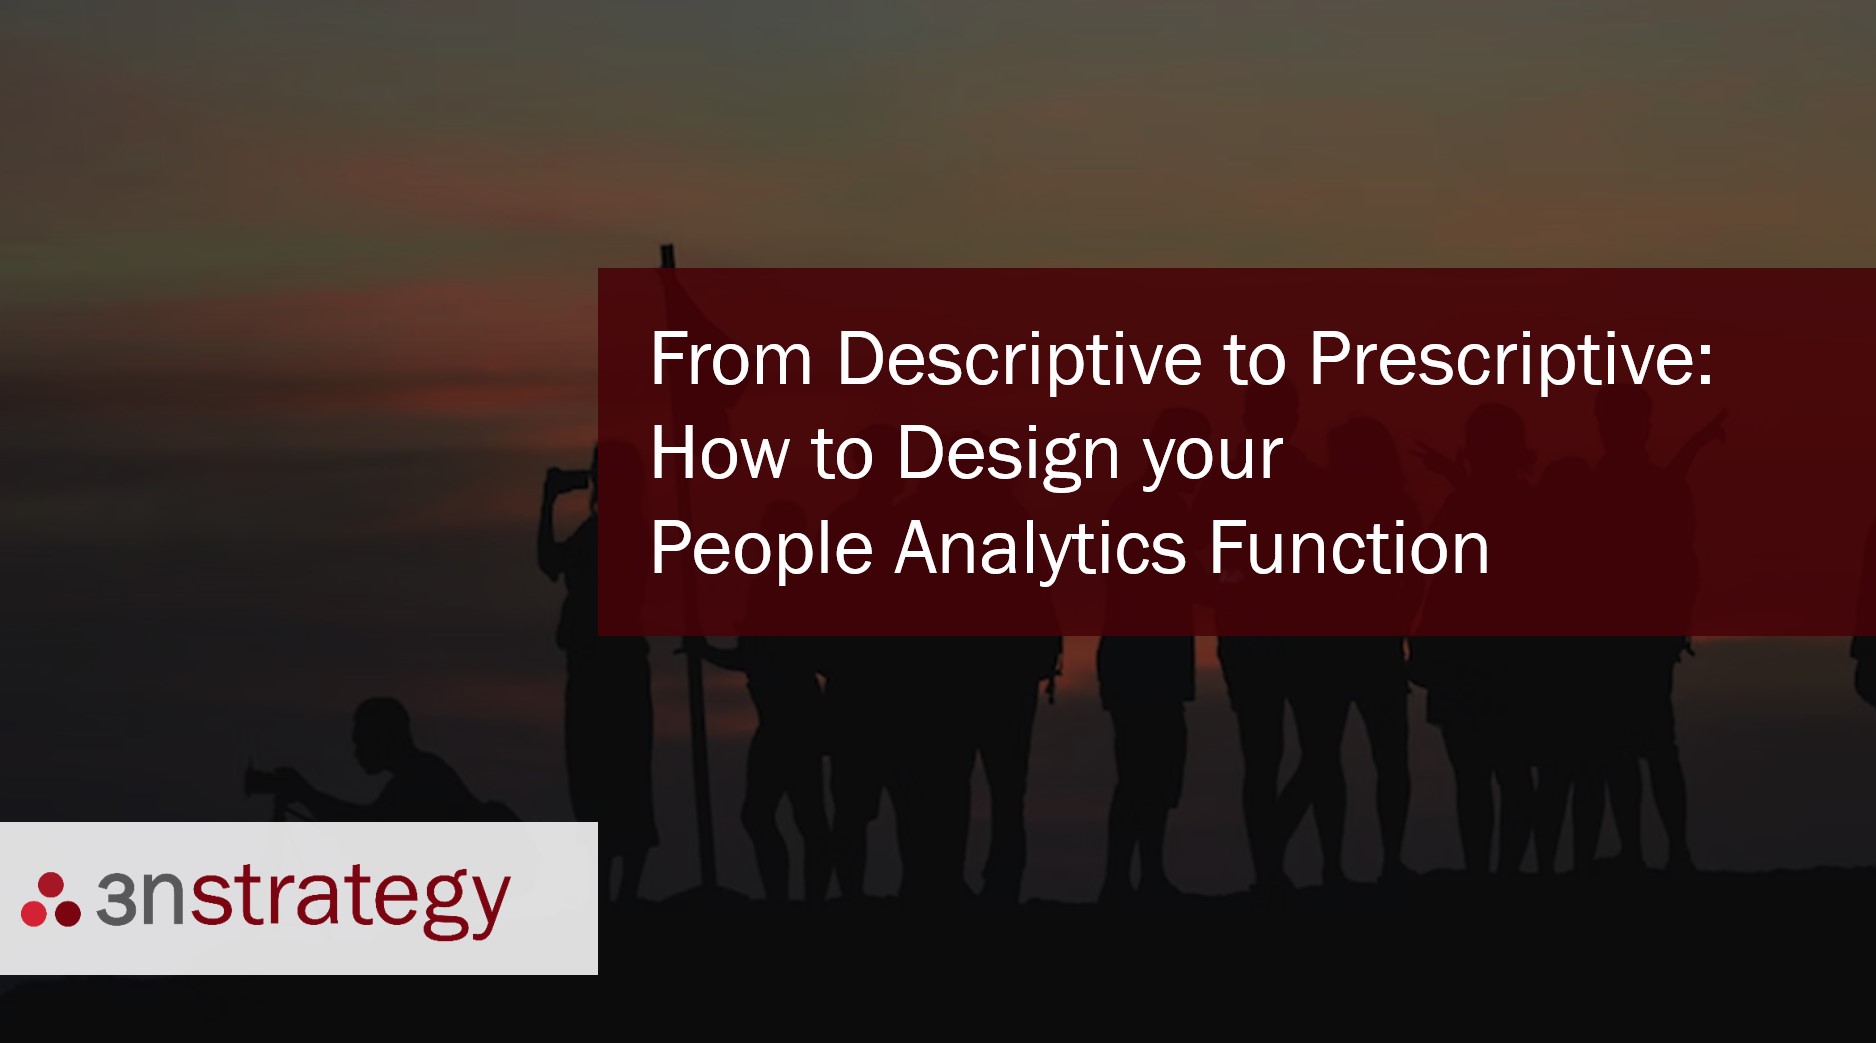 3n Strategy From Descriptive to Prescriptive: How to Design your People Analytics Function